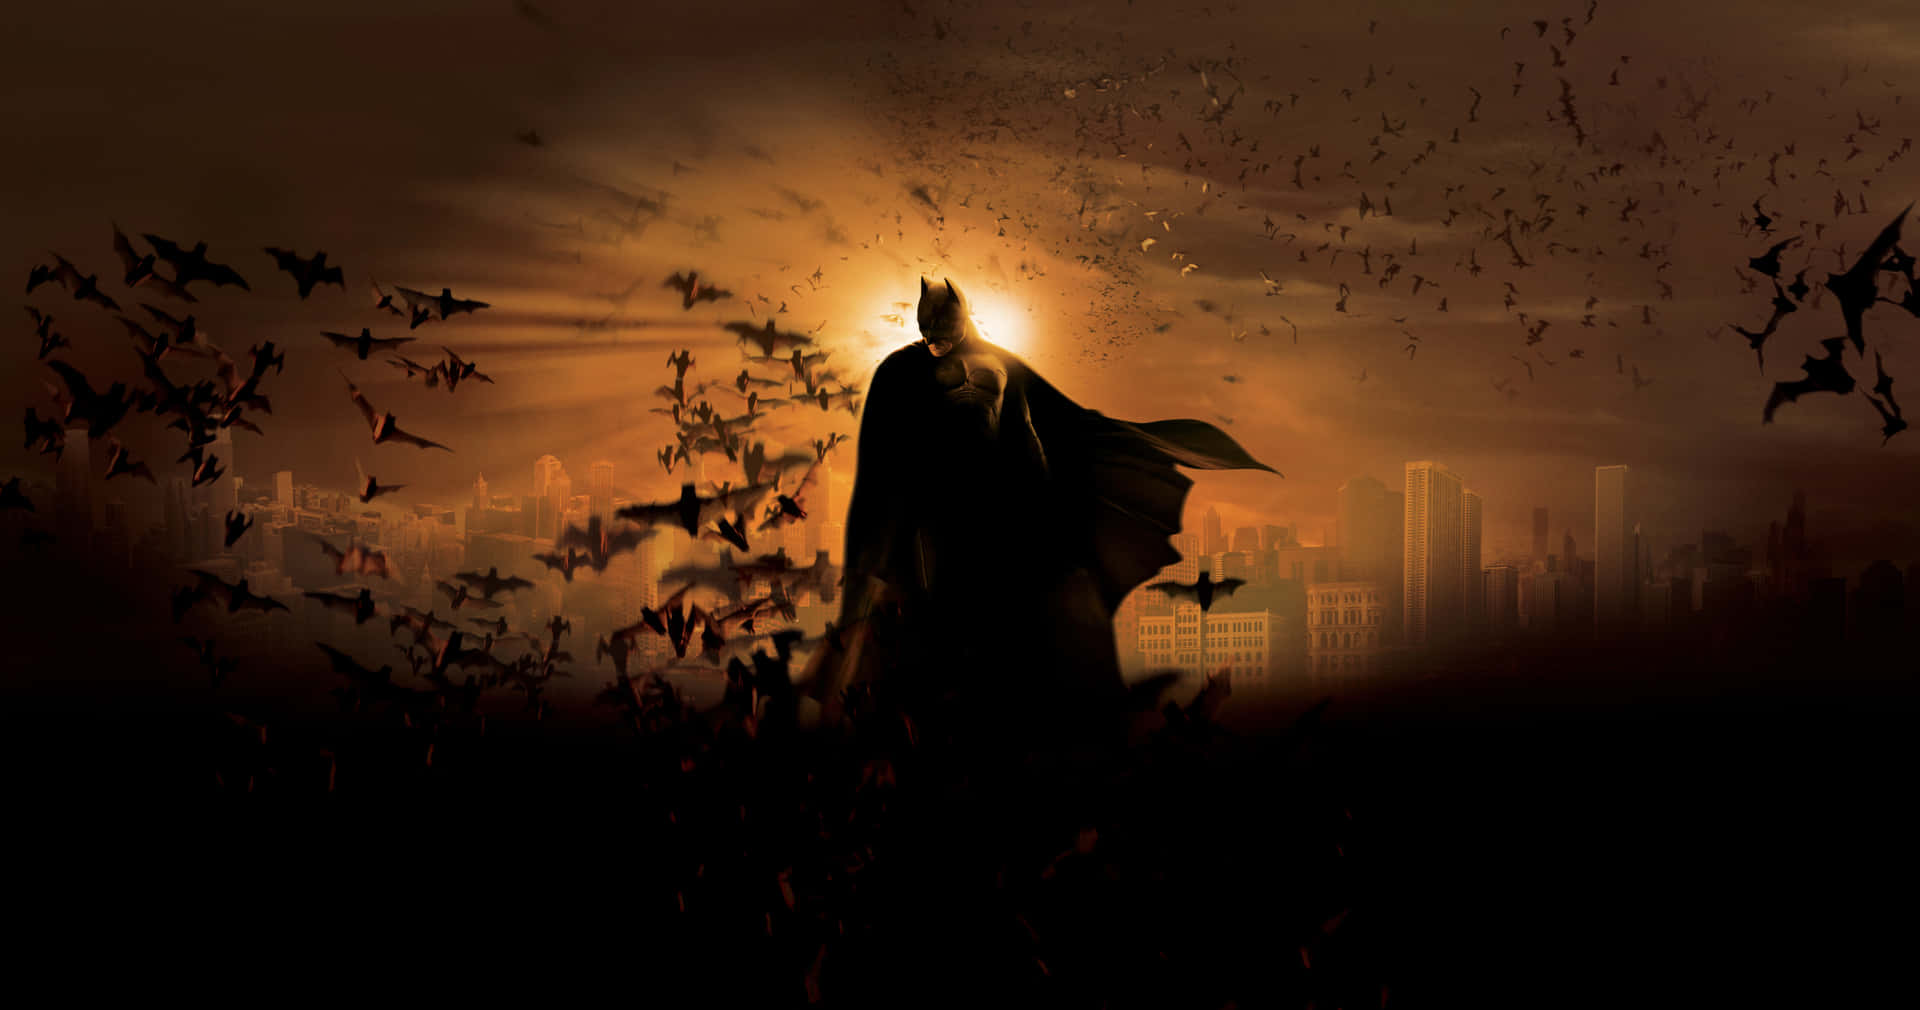 Offering Vast Skyscapes, Gotham City Wallpaper